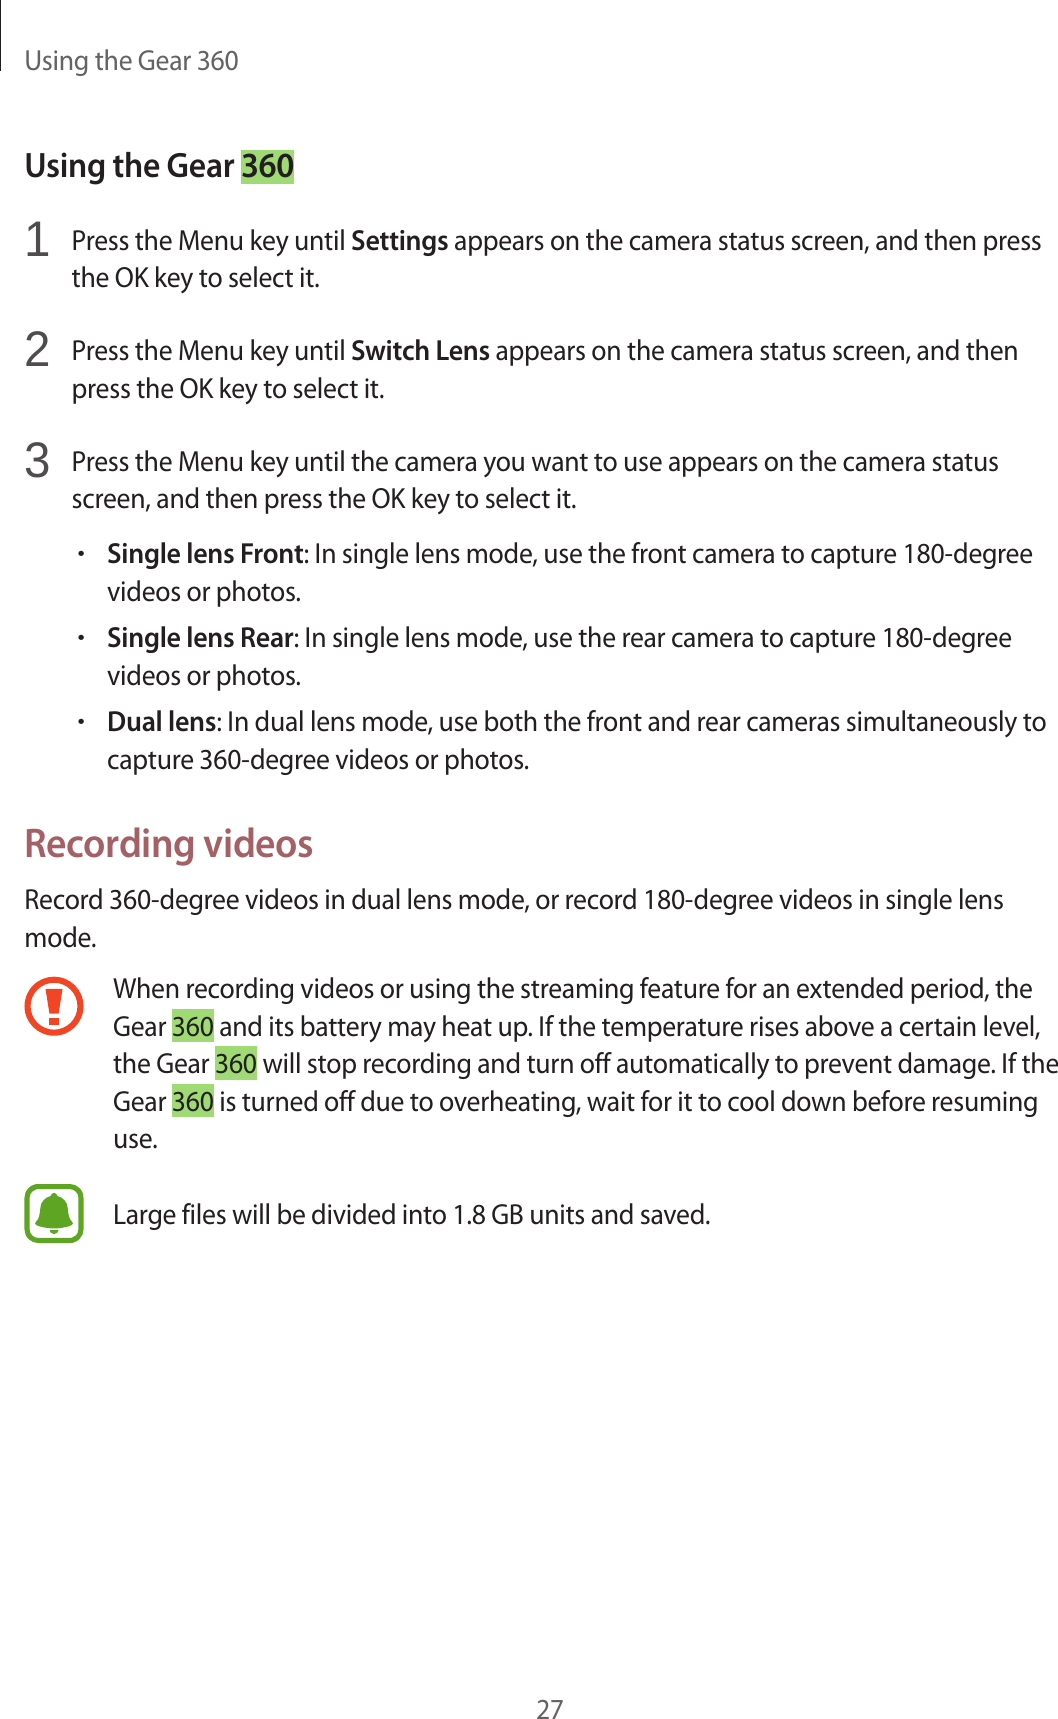 Using the Gear 36027Using the Gear 3601  Press the Menu key until Settings appears on the camera status screen, and then press the OK key to select it.2  Press the Menu key until Switch Lens appears on the camera status screen, and then press the OK key to select it.3  Press the Menu key until the camera you want to use appears on the camera status screen, and then press the OK key to select it.•Single lens Front: In single lens mode, use the front camera to capture 180-degree videos or photos.•Single lens Rear: In single lens mode, use the rear camera to capture 180-degree videos or photos.•Dual lens: In dual lens mode, use both the front and rear cameras simultaneously to capture 360-degree videos or photos.Recording videosRecord 360-degree videos in dual lens mode, or record 180-degree videos in single lens mode.When recording videos or using the streaming feature for an extended period, the Gear 360 and its battery may heat up. If the temperature rises above a certain level, the Gear 360 will stop recording and turn off automatically to prevent damage. If the Gear 360 is turned off due to overheating, wait for it to cool down before resuming use.Large files will be divided into 1.8 GB units and saved.